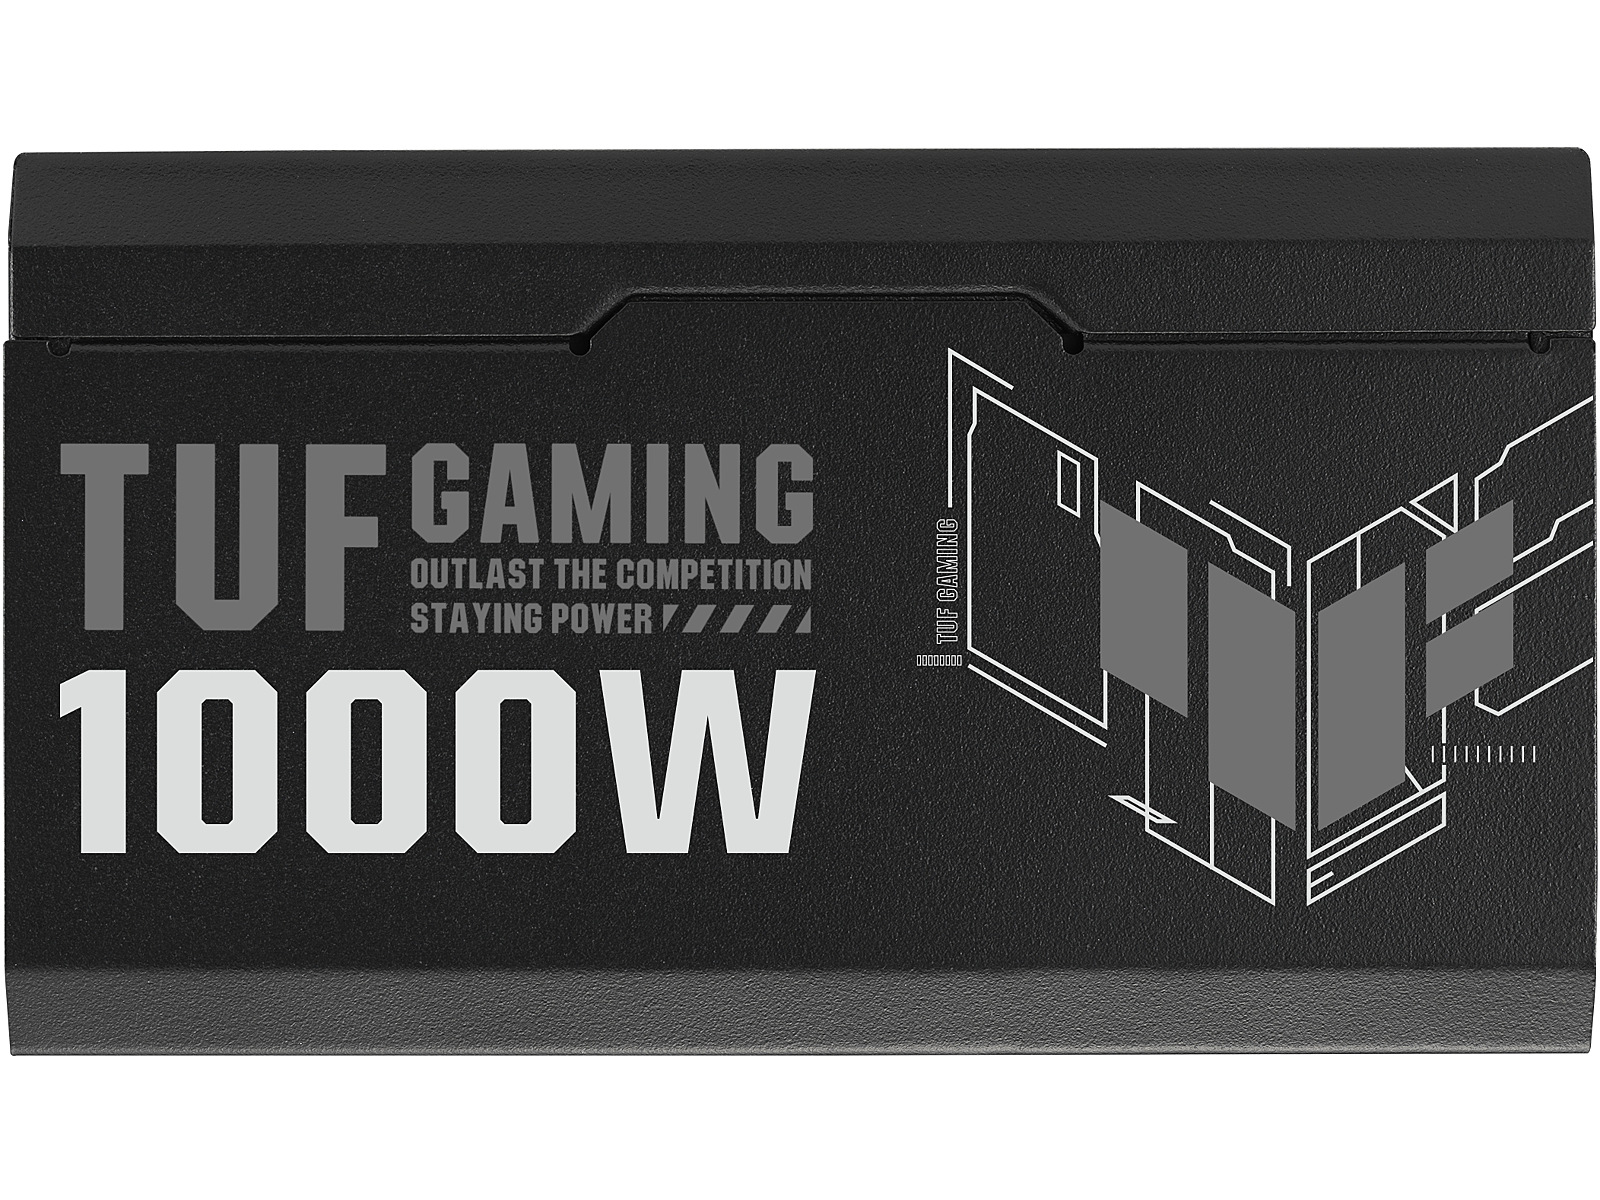 ASUS TUF Gaming 1000W Gold (1000 Watt, ATX 3.0 Compatible Fully Modular  Power Supply, 80+ Gold Certified, Military-Grade Components, Dual Ball